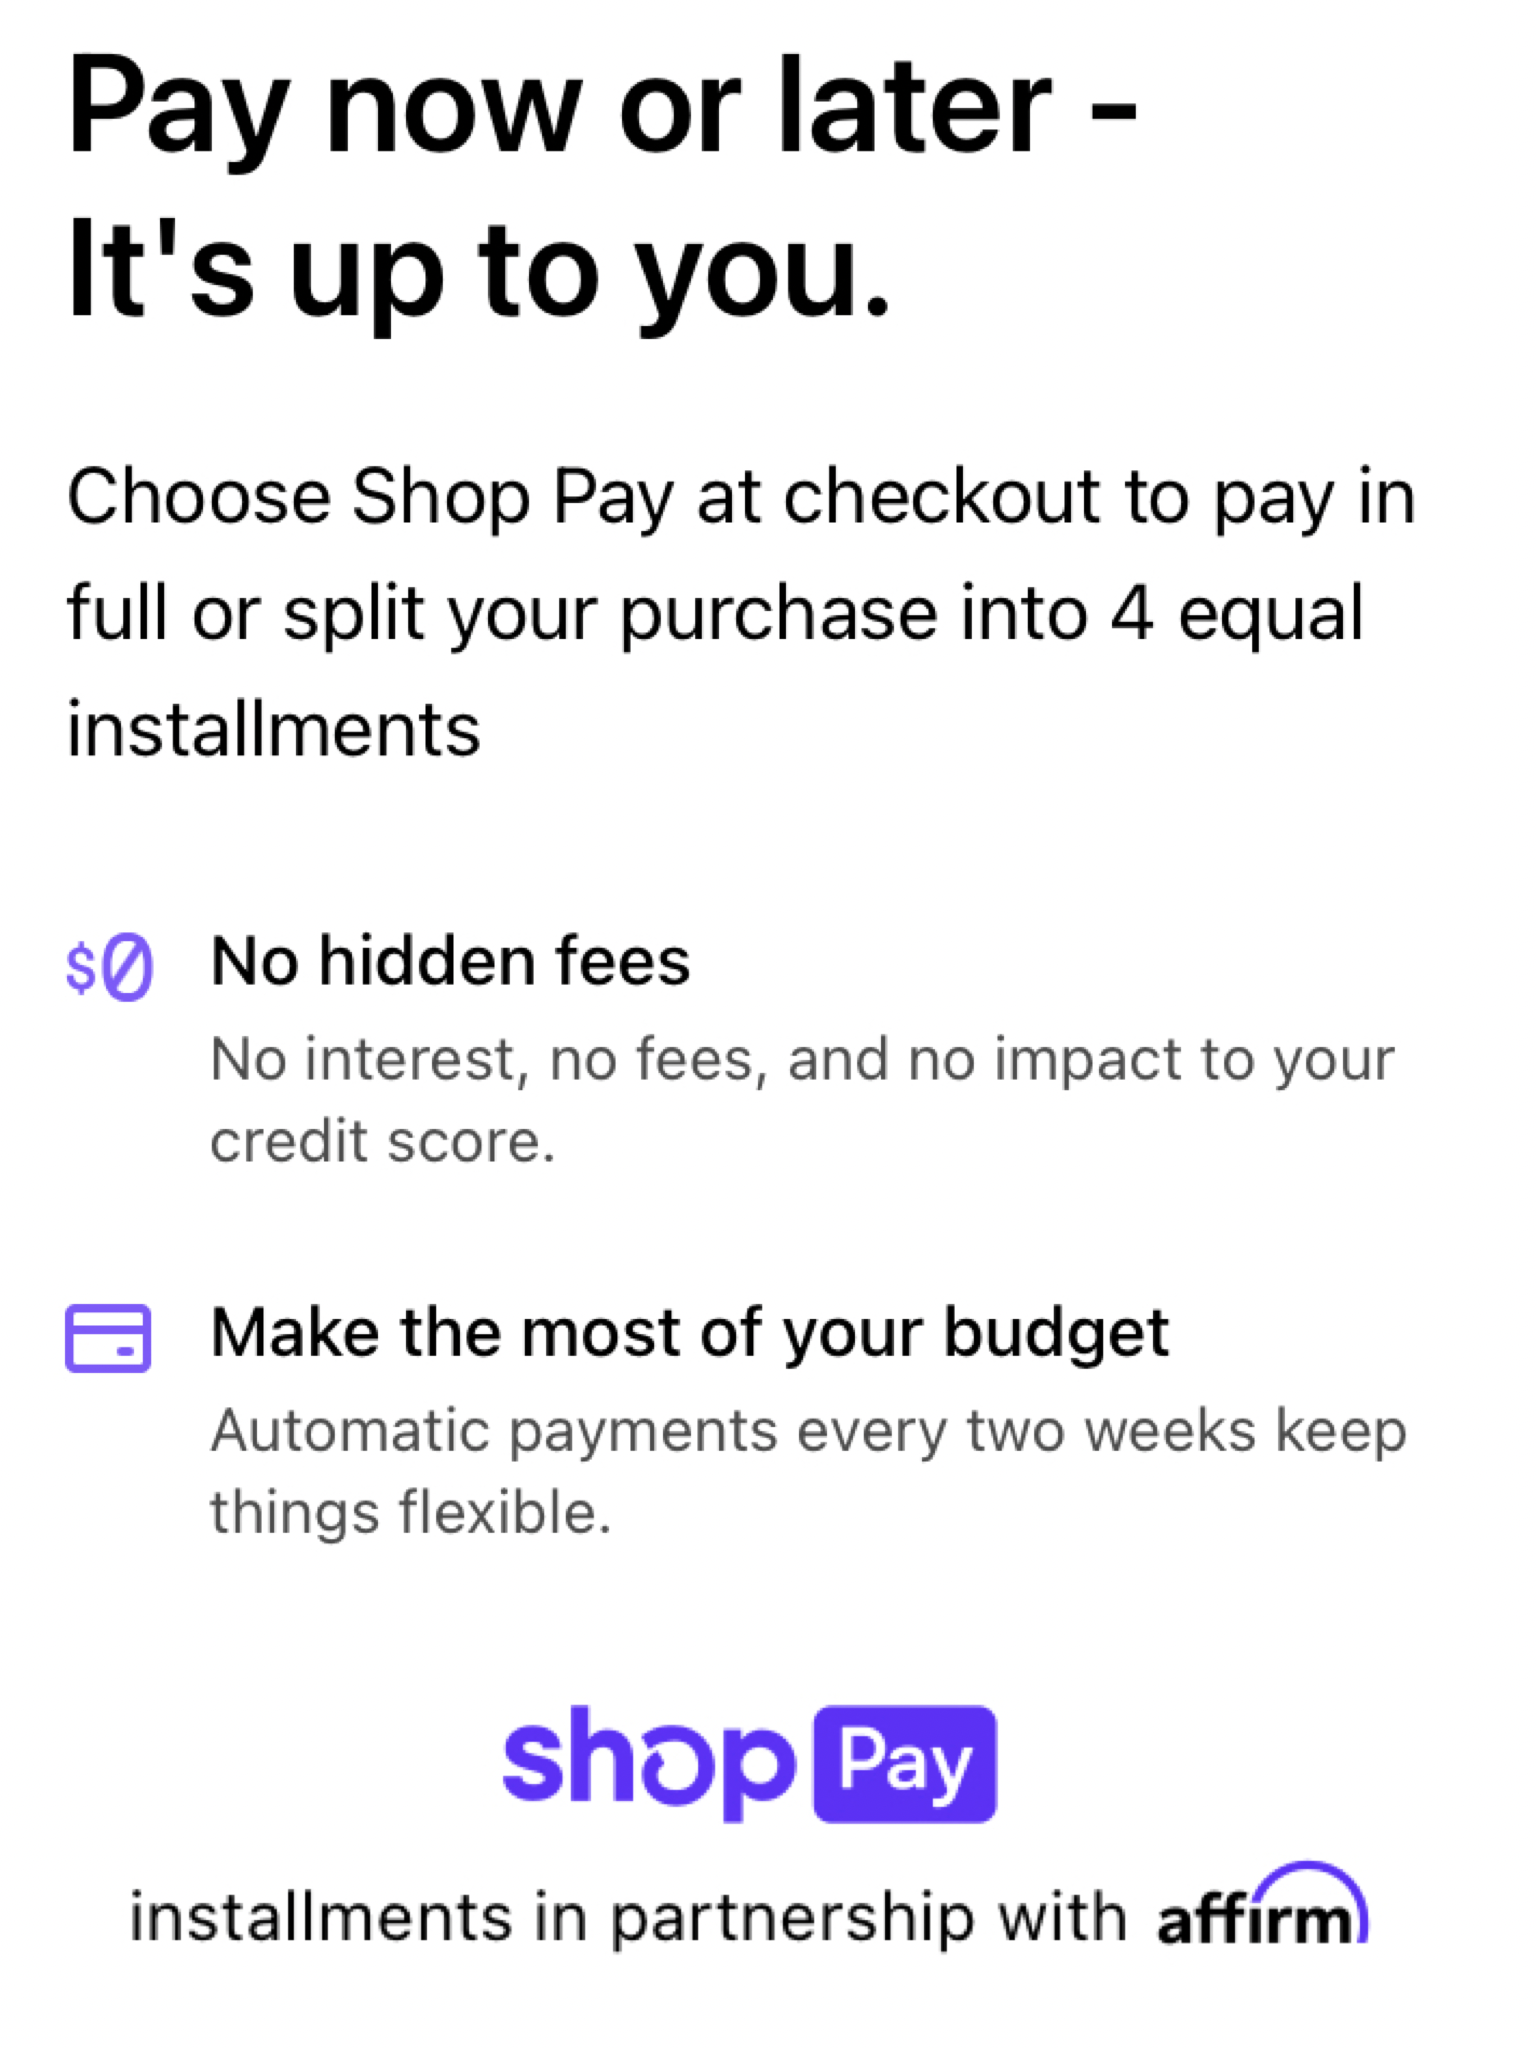 SHOP PAY, BUY NOW... PAY LATER.